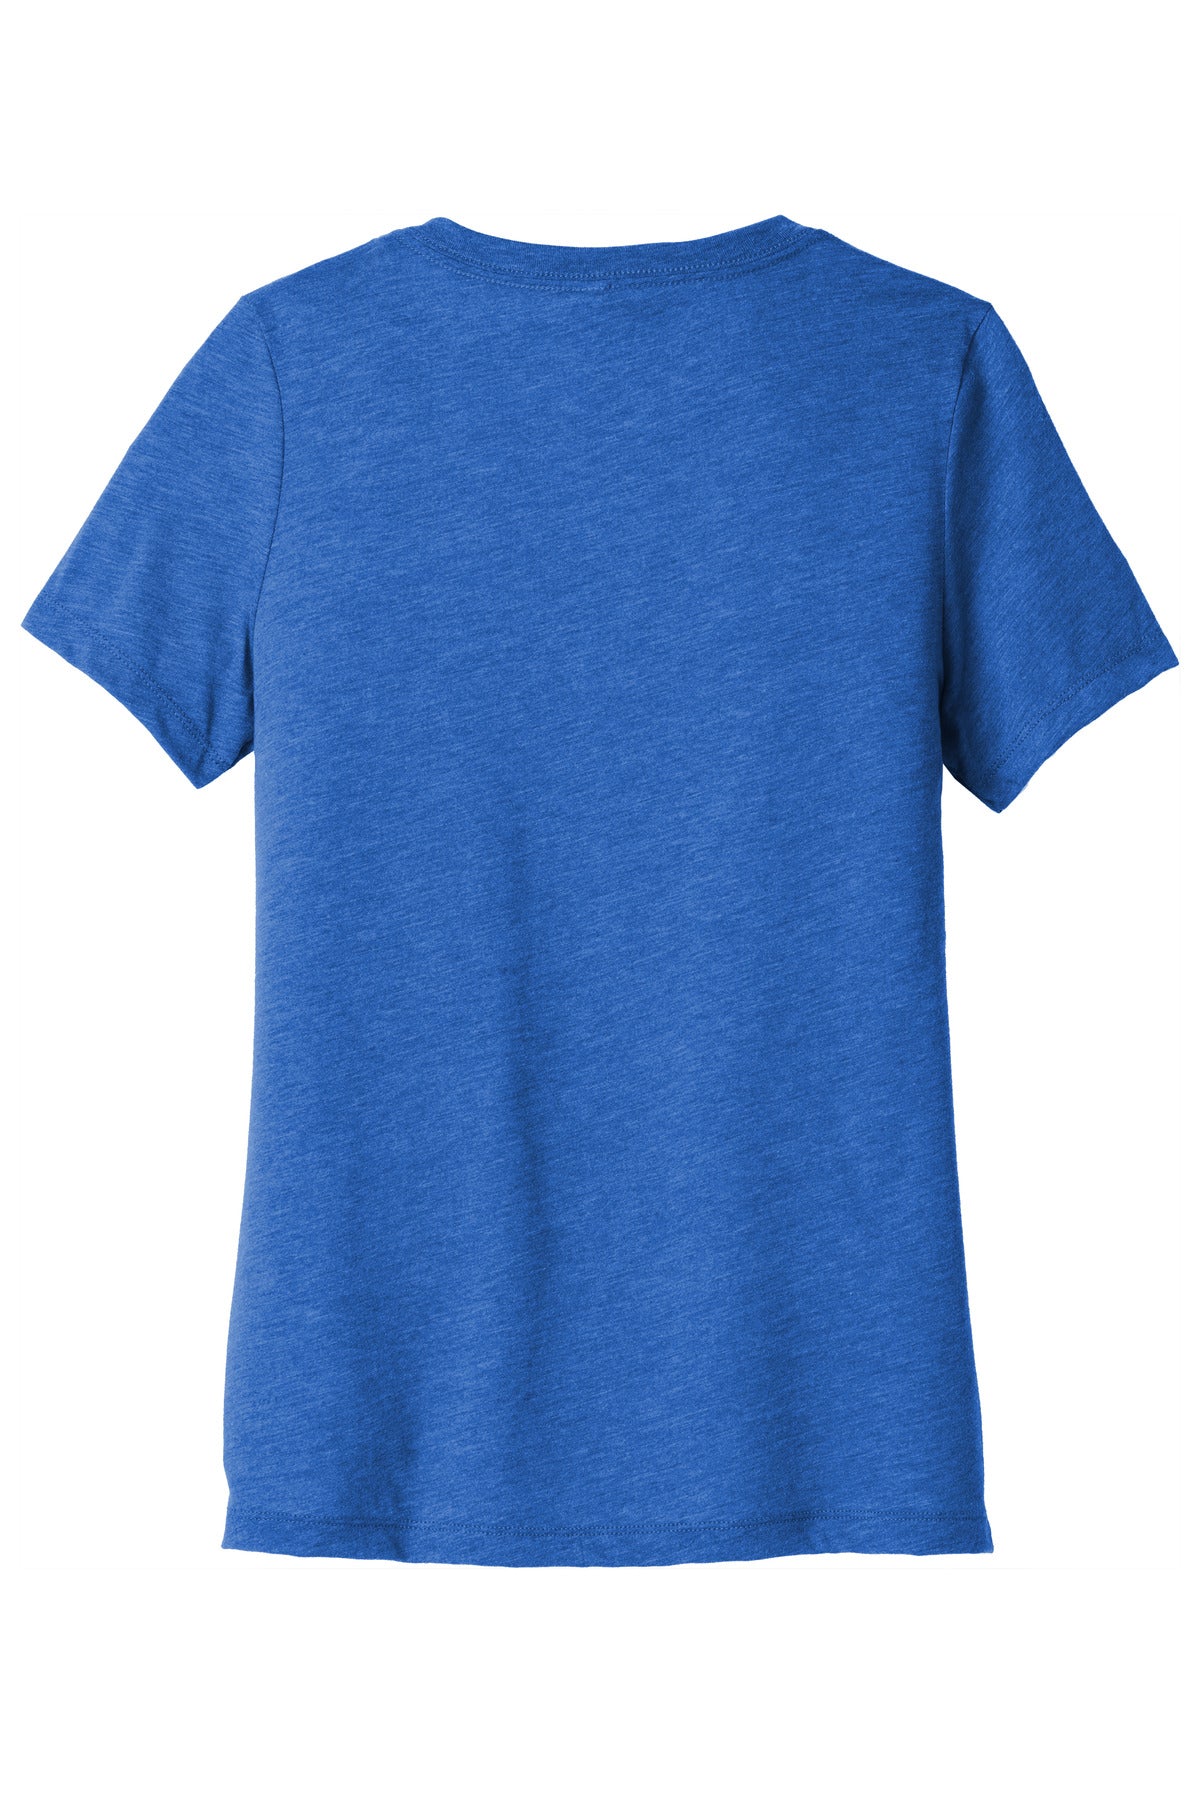 BELLA+CANVAS Women's Relaxed Triblend V-Neck Tee BC6415